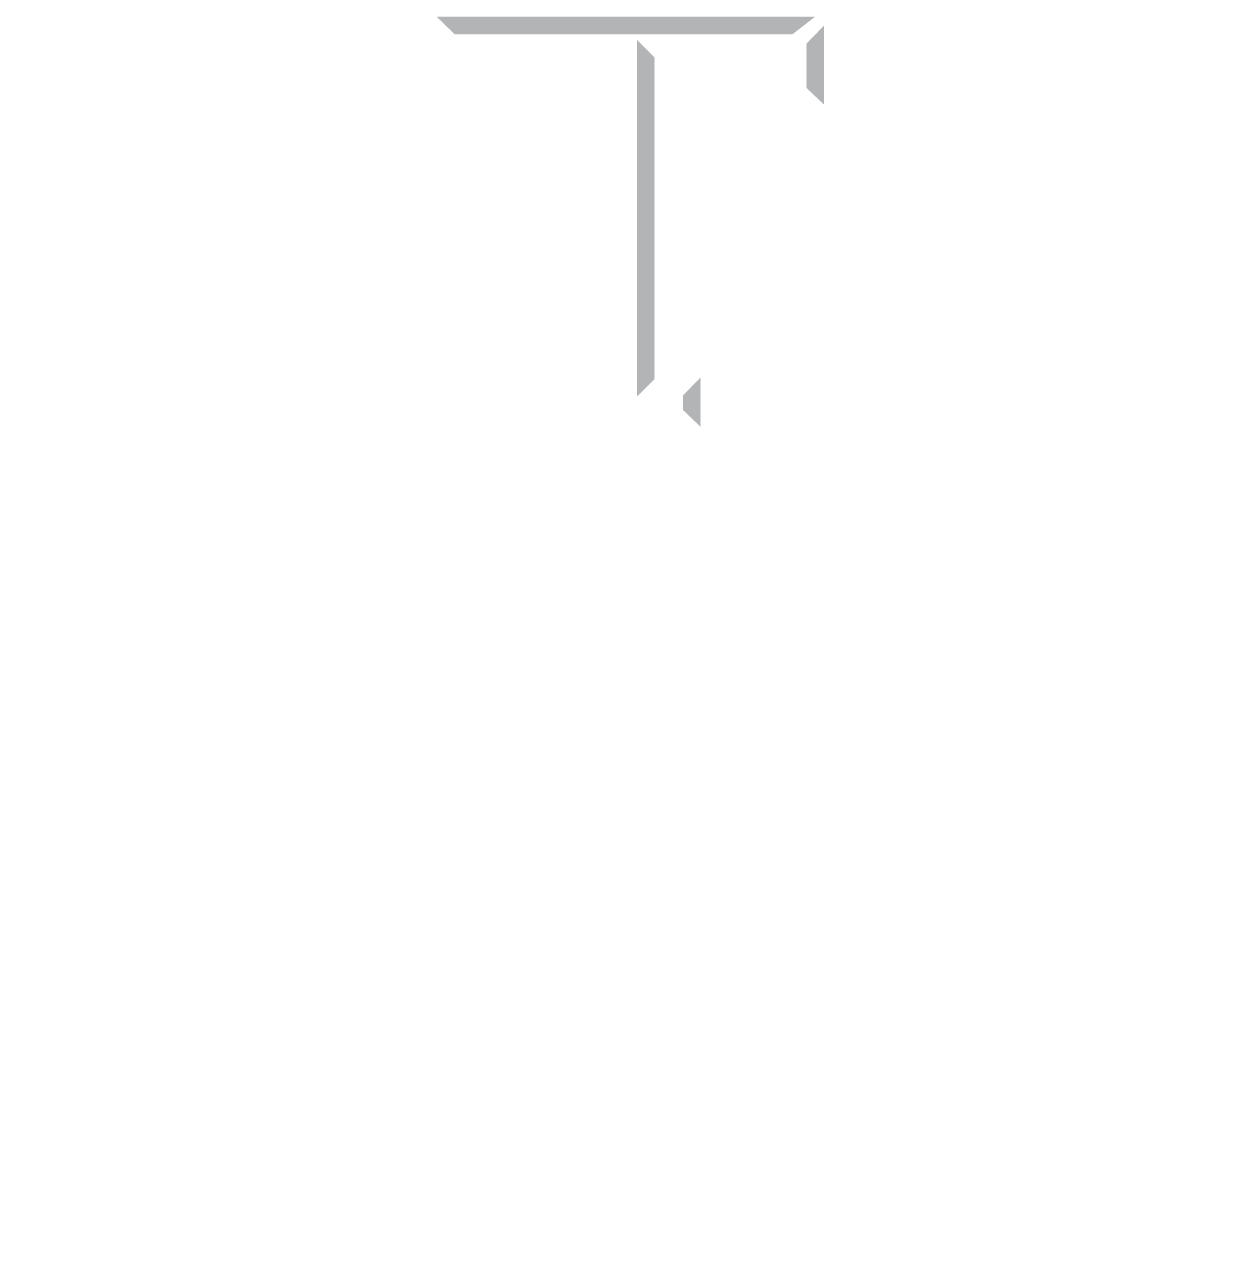 ArtSci-White-Stacked.png